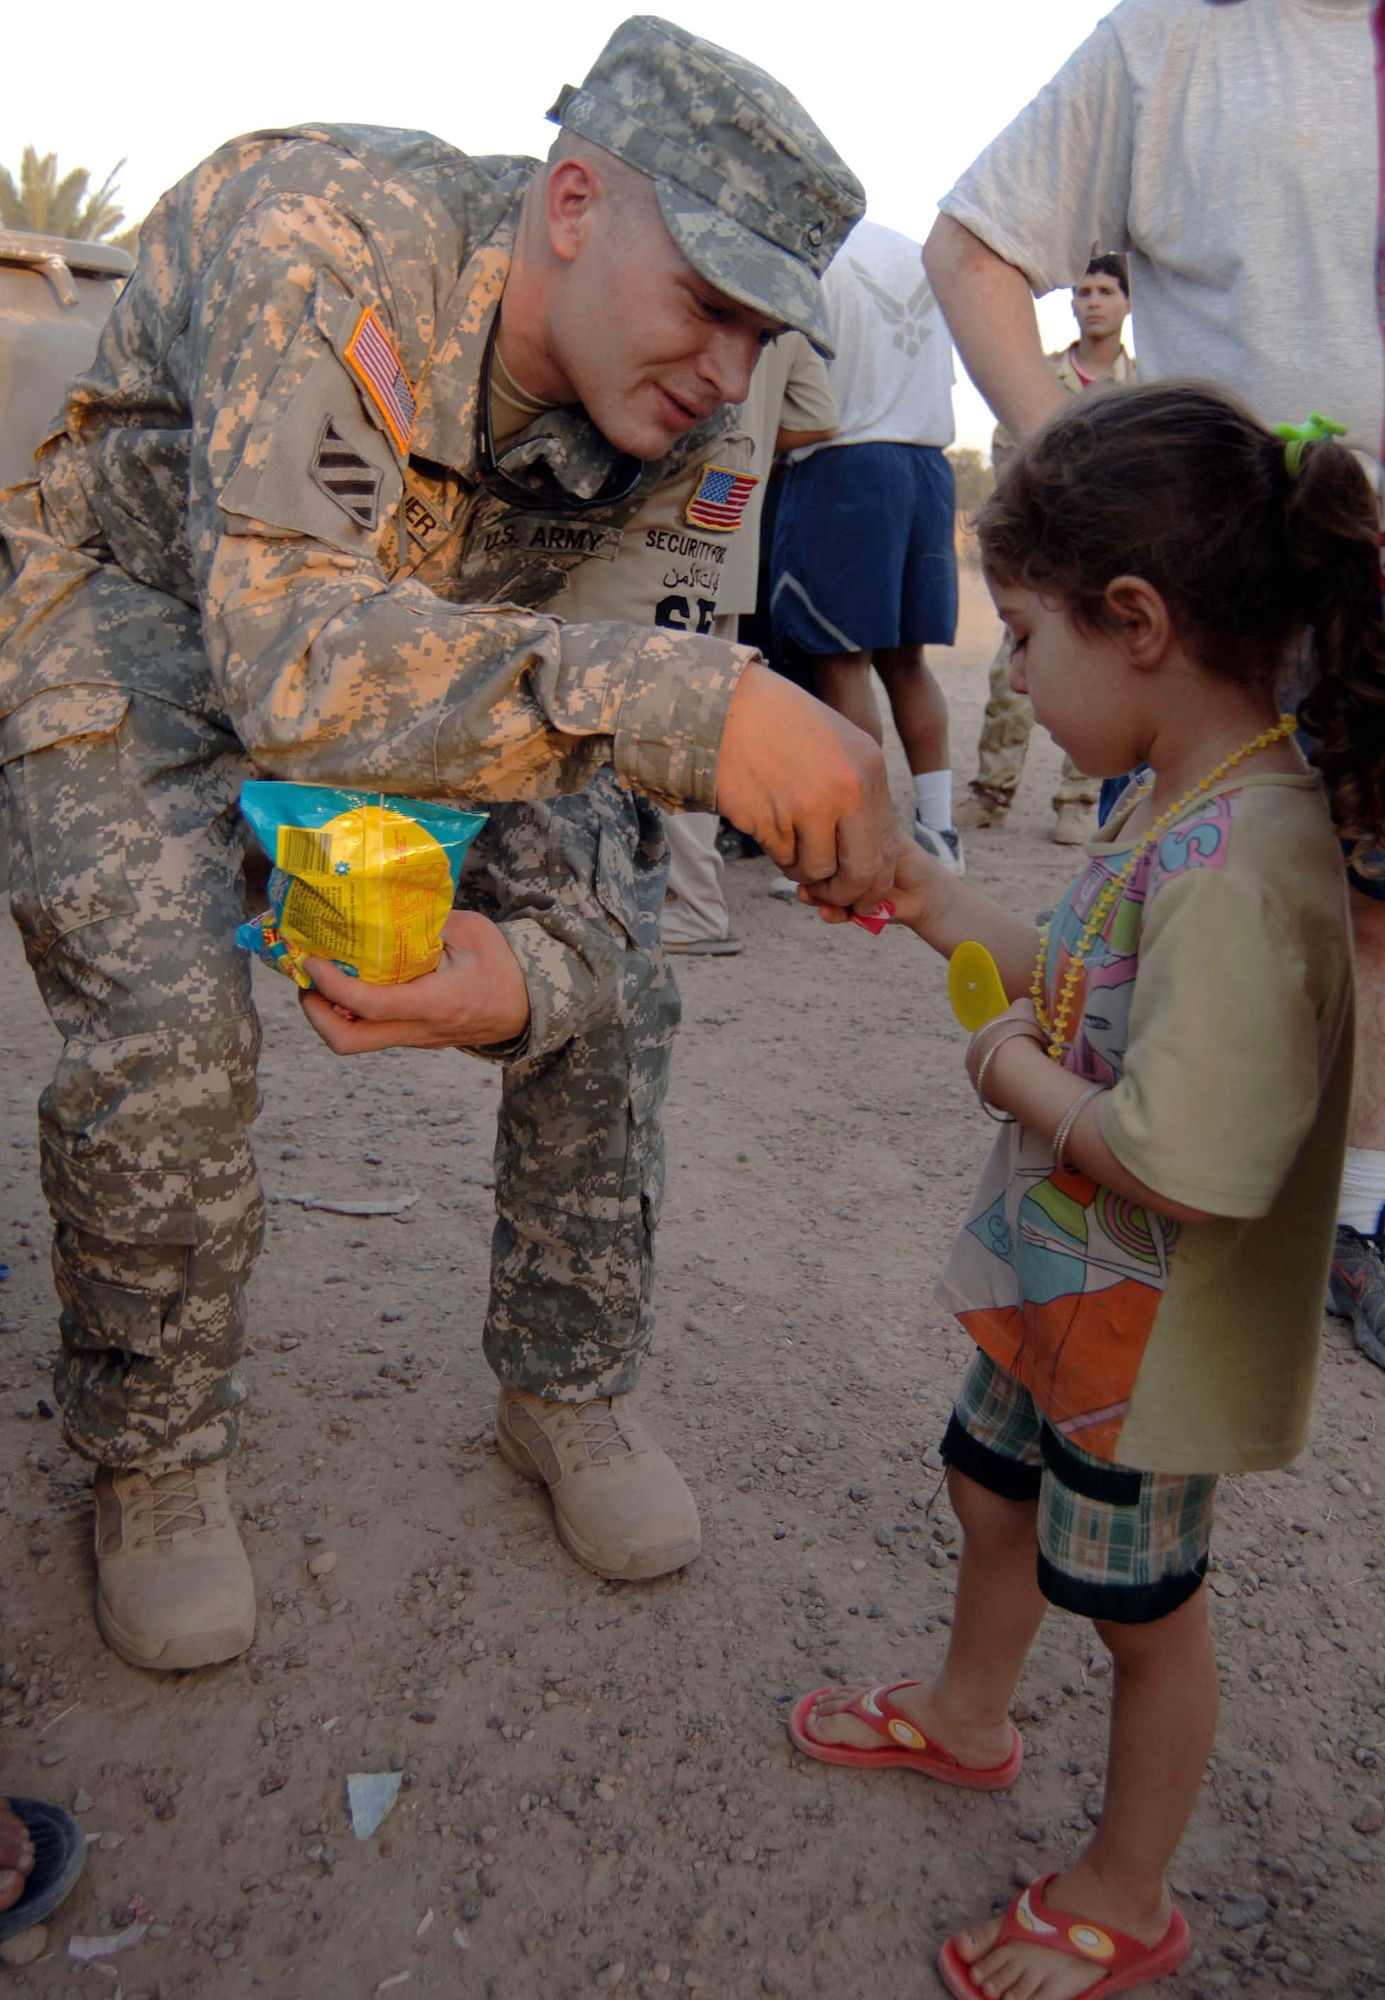 Army Pfc. Jeremy Breuckner offers candy to an Iraqi child at the Victory Base Complex in Iraq July 29. This was part of an Air Force effort to provided humanitarian aide to children of Iraqi soldiers. Other items passed out were school supplies, clothing and soccer balls. Private Breuckner is a 447th Expeditionary Security Forces Squadron patrolman. (U.S. Air Force photo/Tech. Sgt. Russell Wicke)